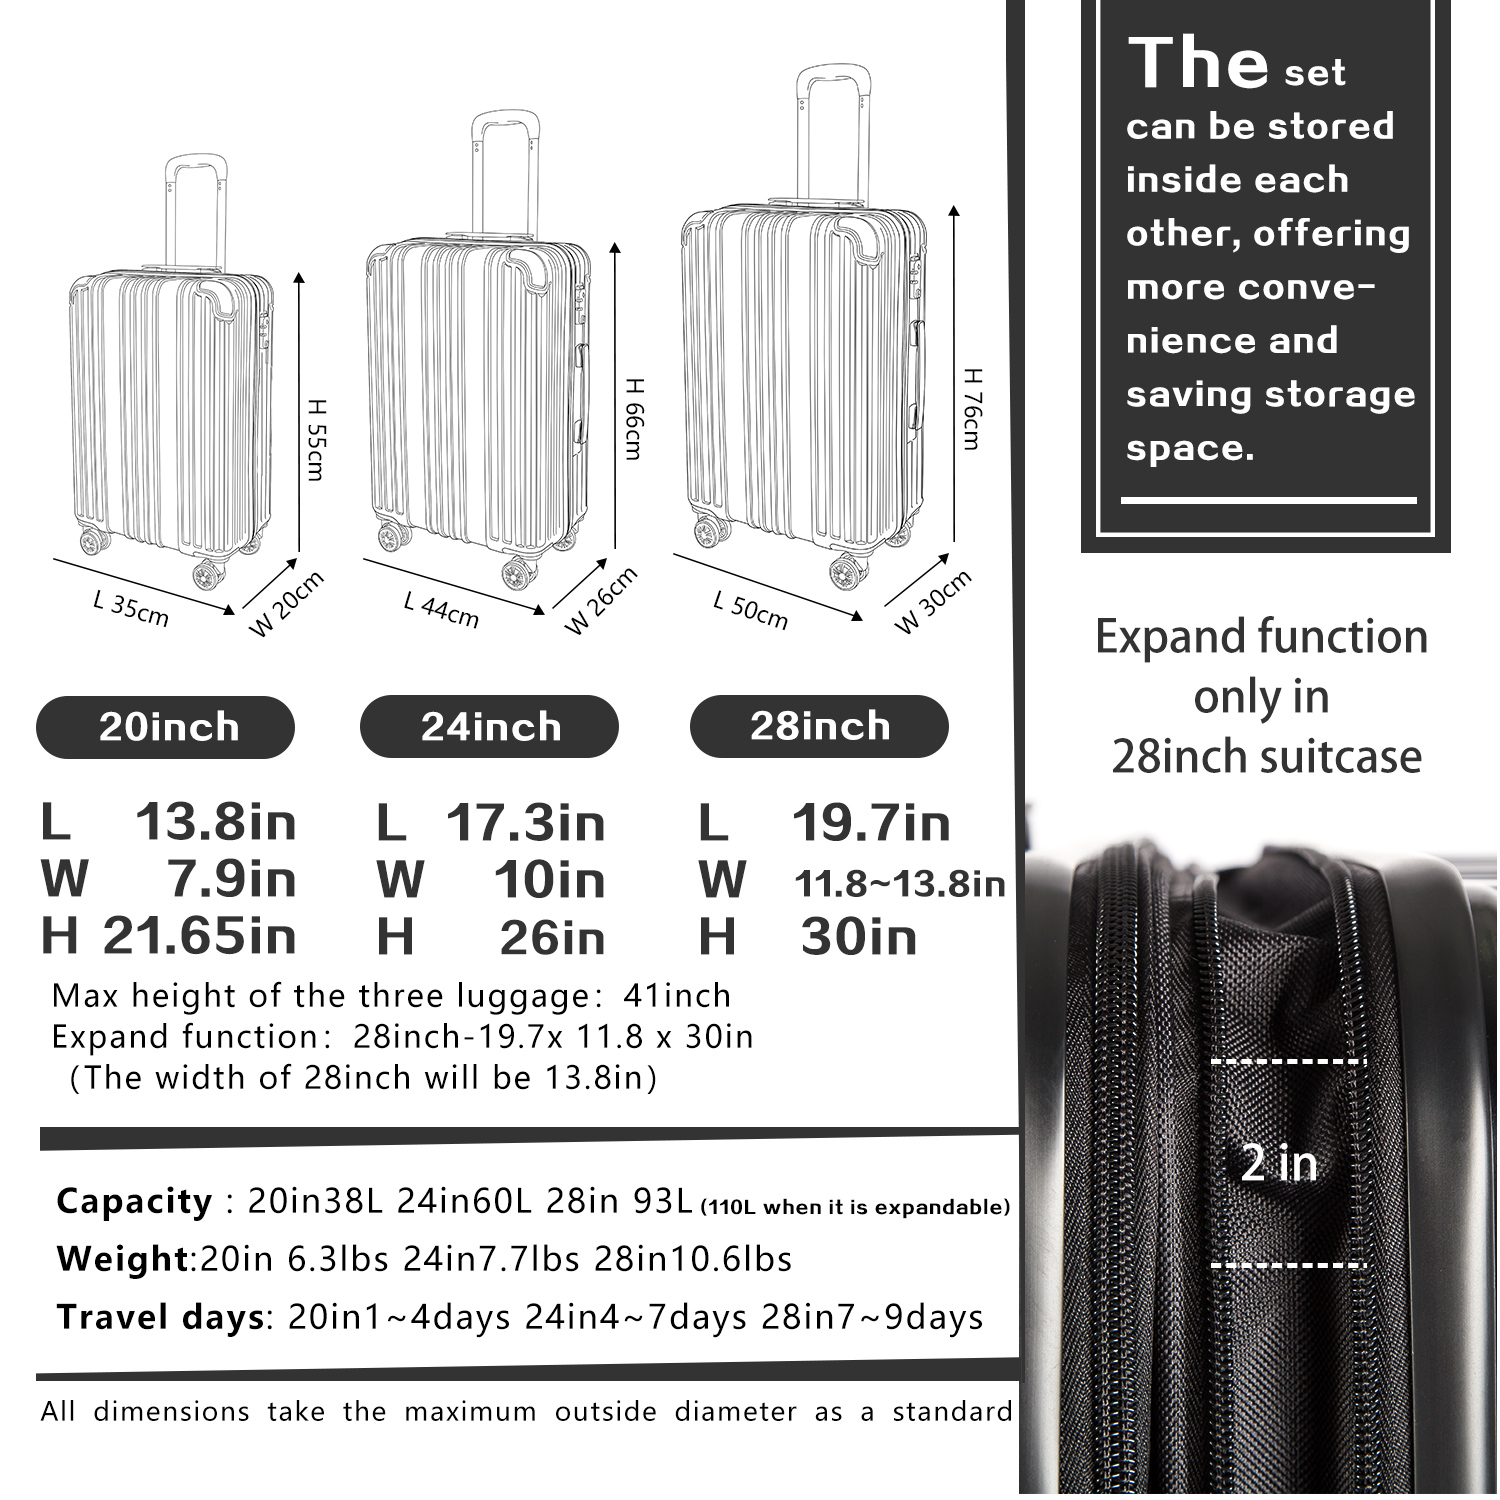 COOLIFE Luggage Expandable (28in only)Suitcase 3 Pcs Set with TSA Lock